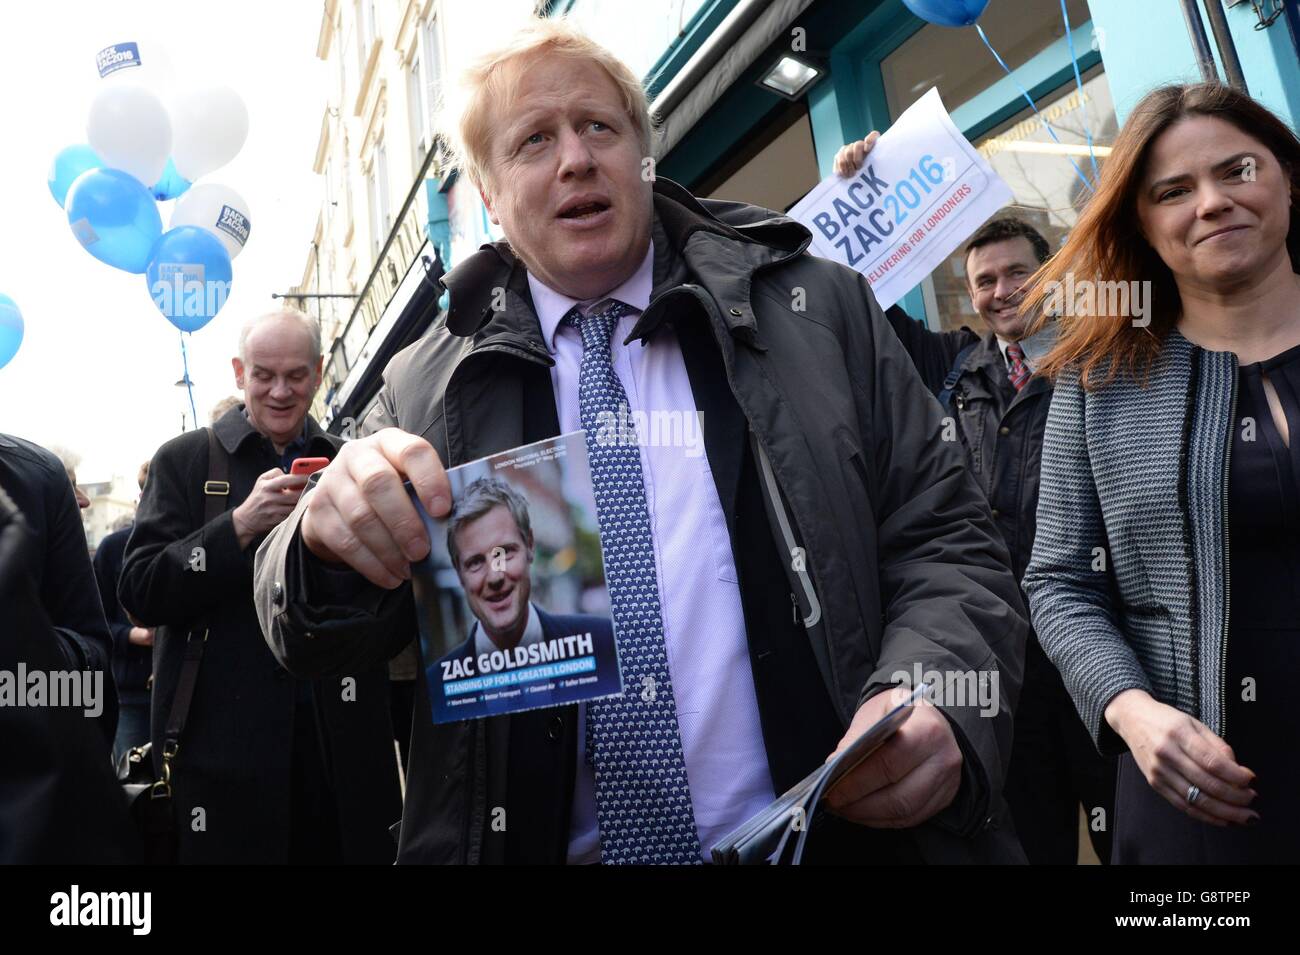 Mayor of London Boris Johnson campaigning with Conservative mayoral candidate, Zac Goldsmith (not pictured) in the Portobello Road area of Notting Hill in London for the forthcoming City Hall elections on May 5th. Stock Photo